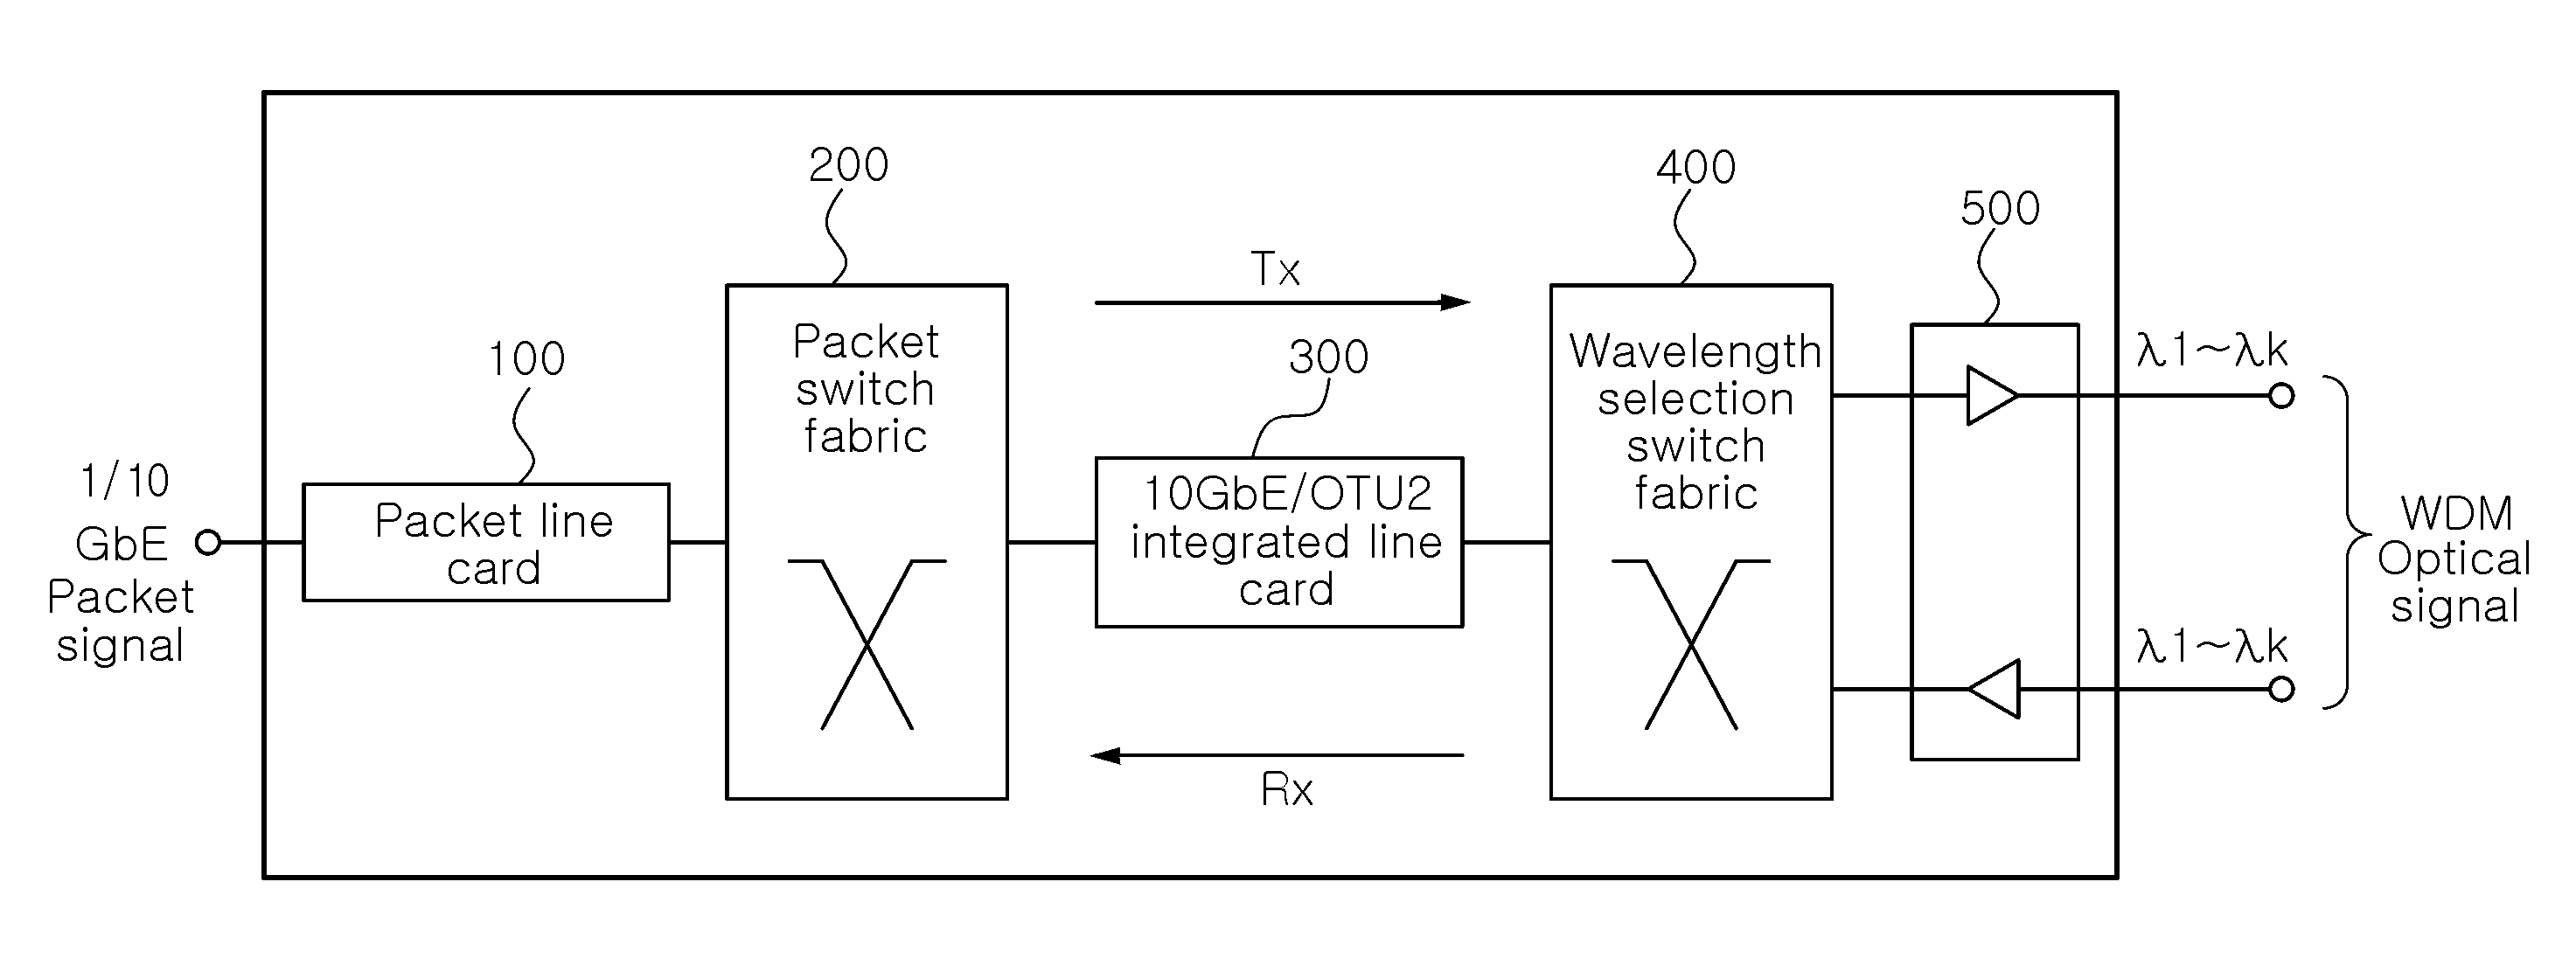 Packet-optical integrated switch without optical transponder